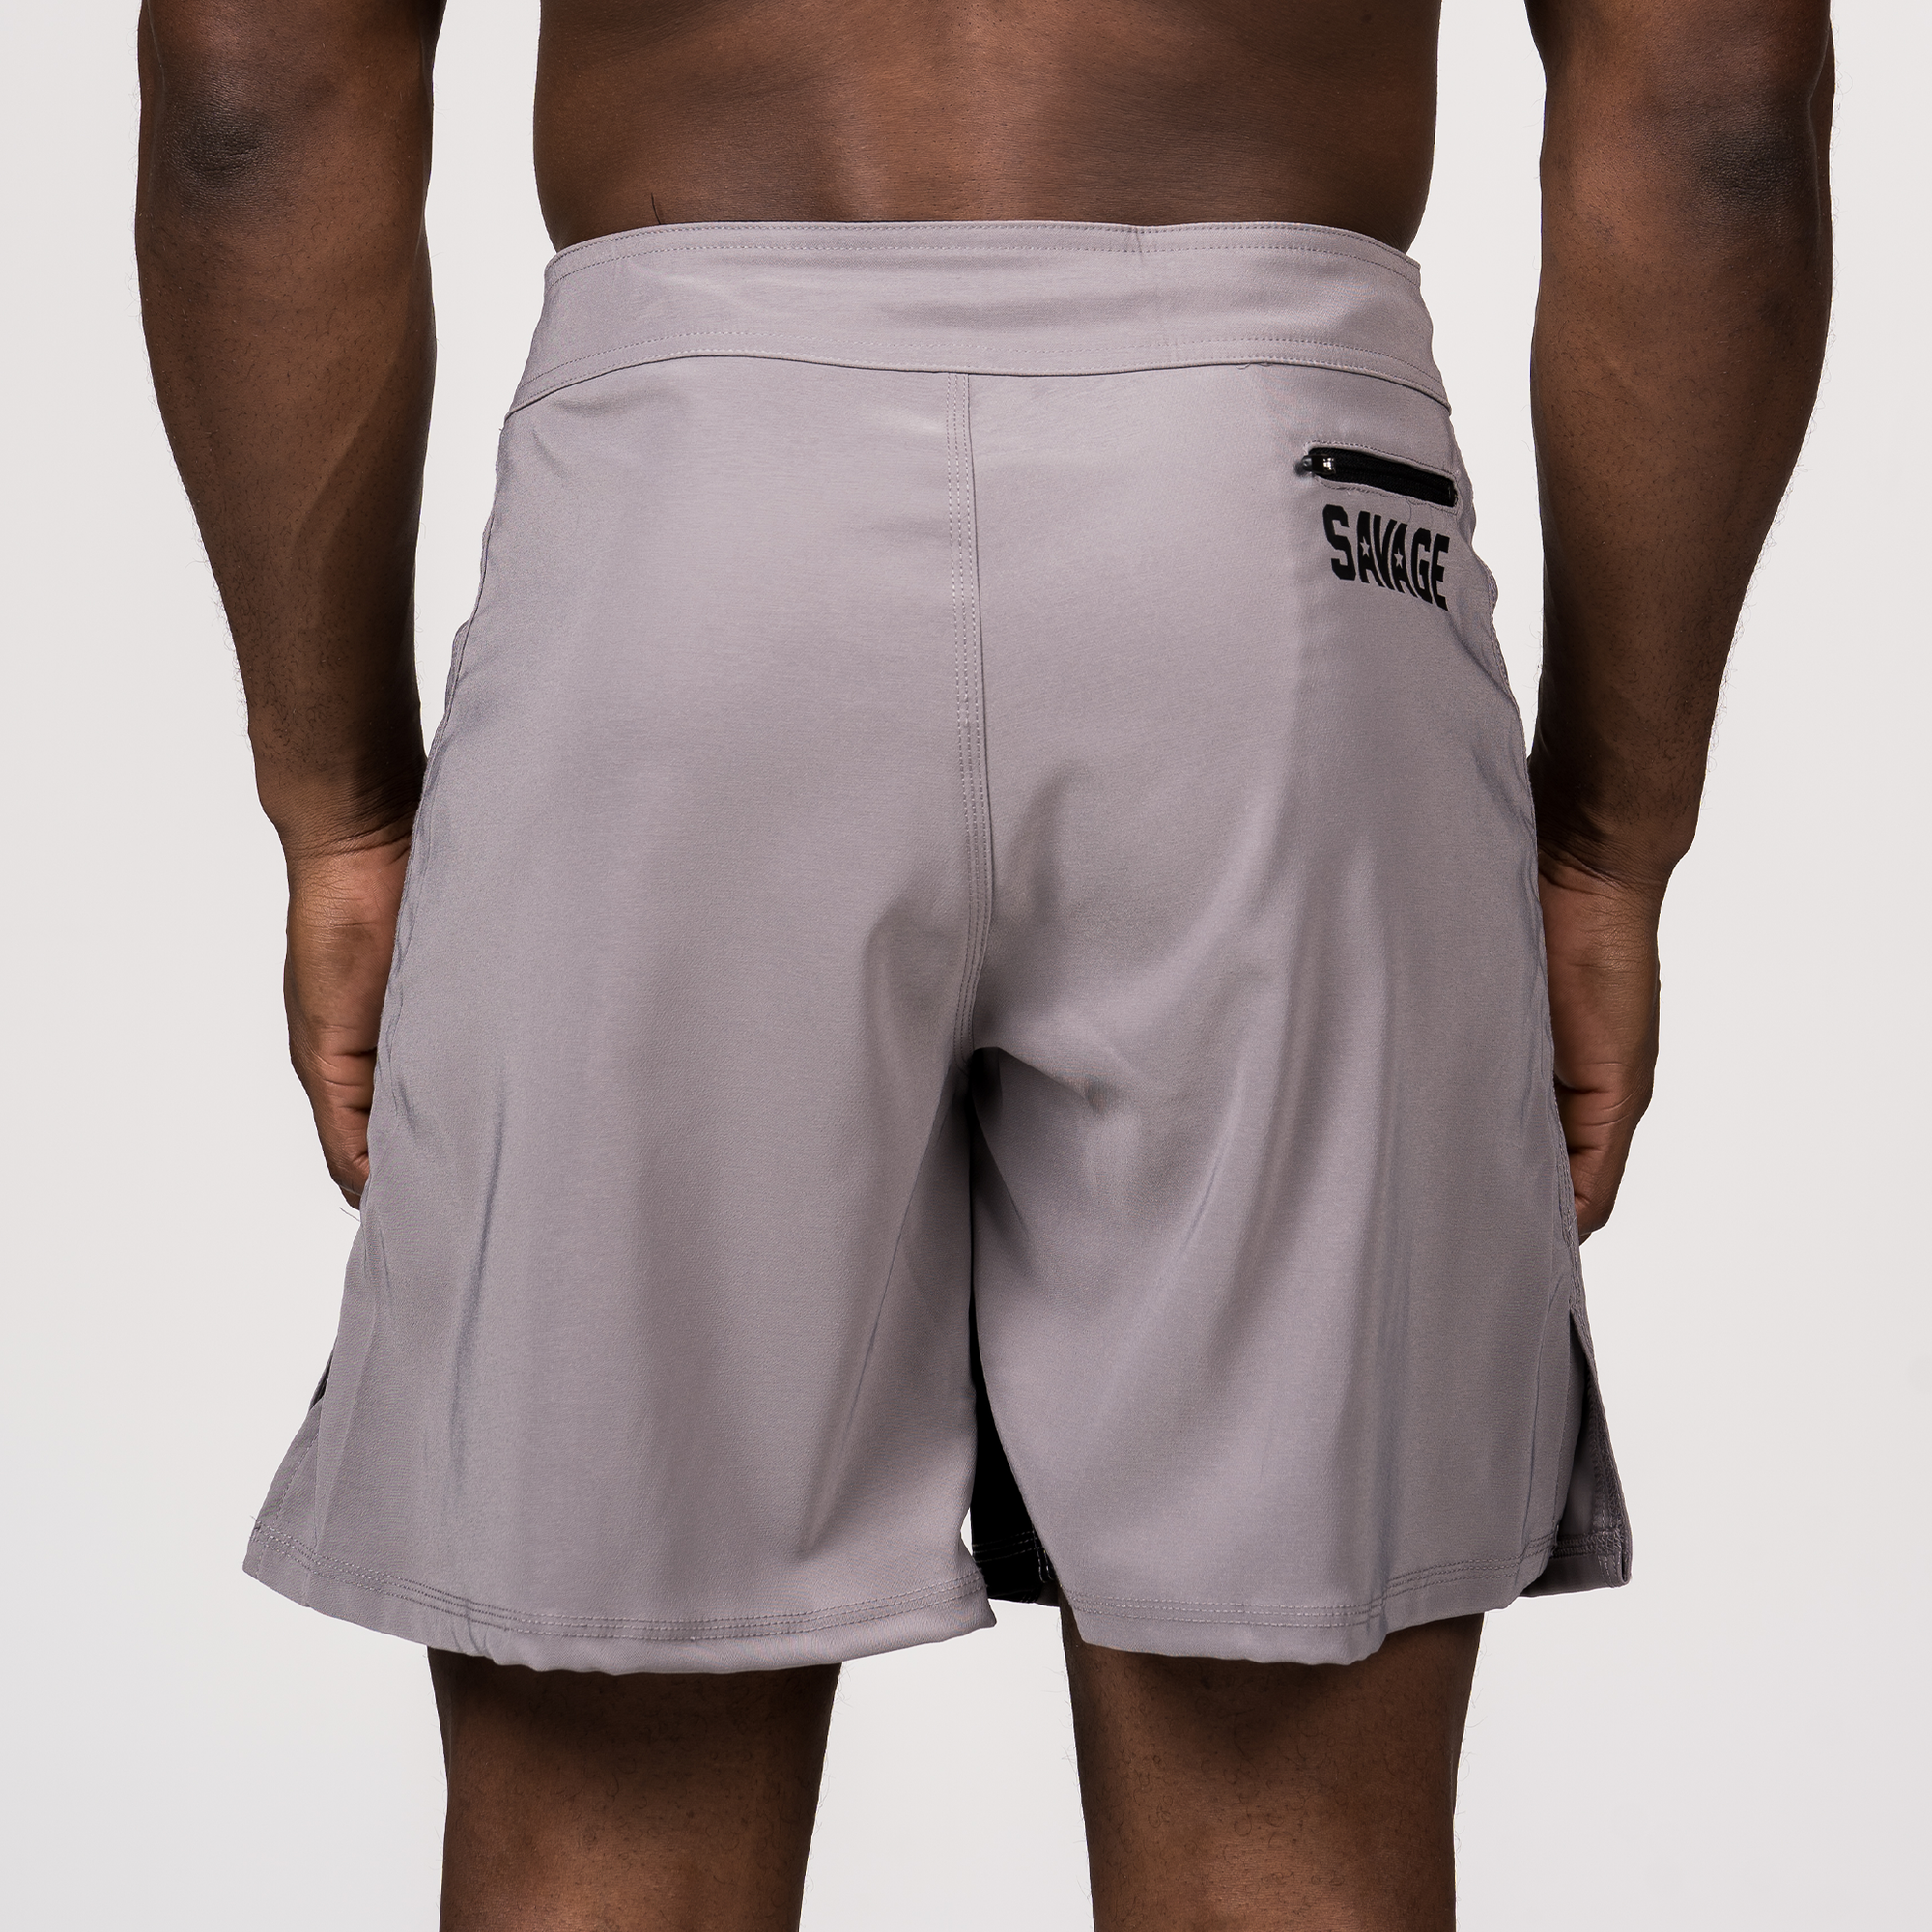 Men's Shorts - Melee Fight Shorts - Gray - Savage Barbell Apparel